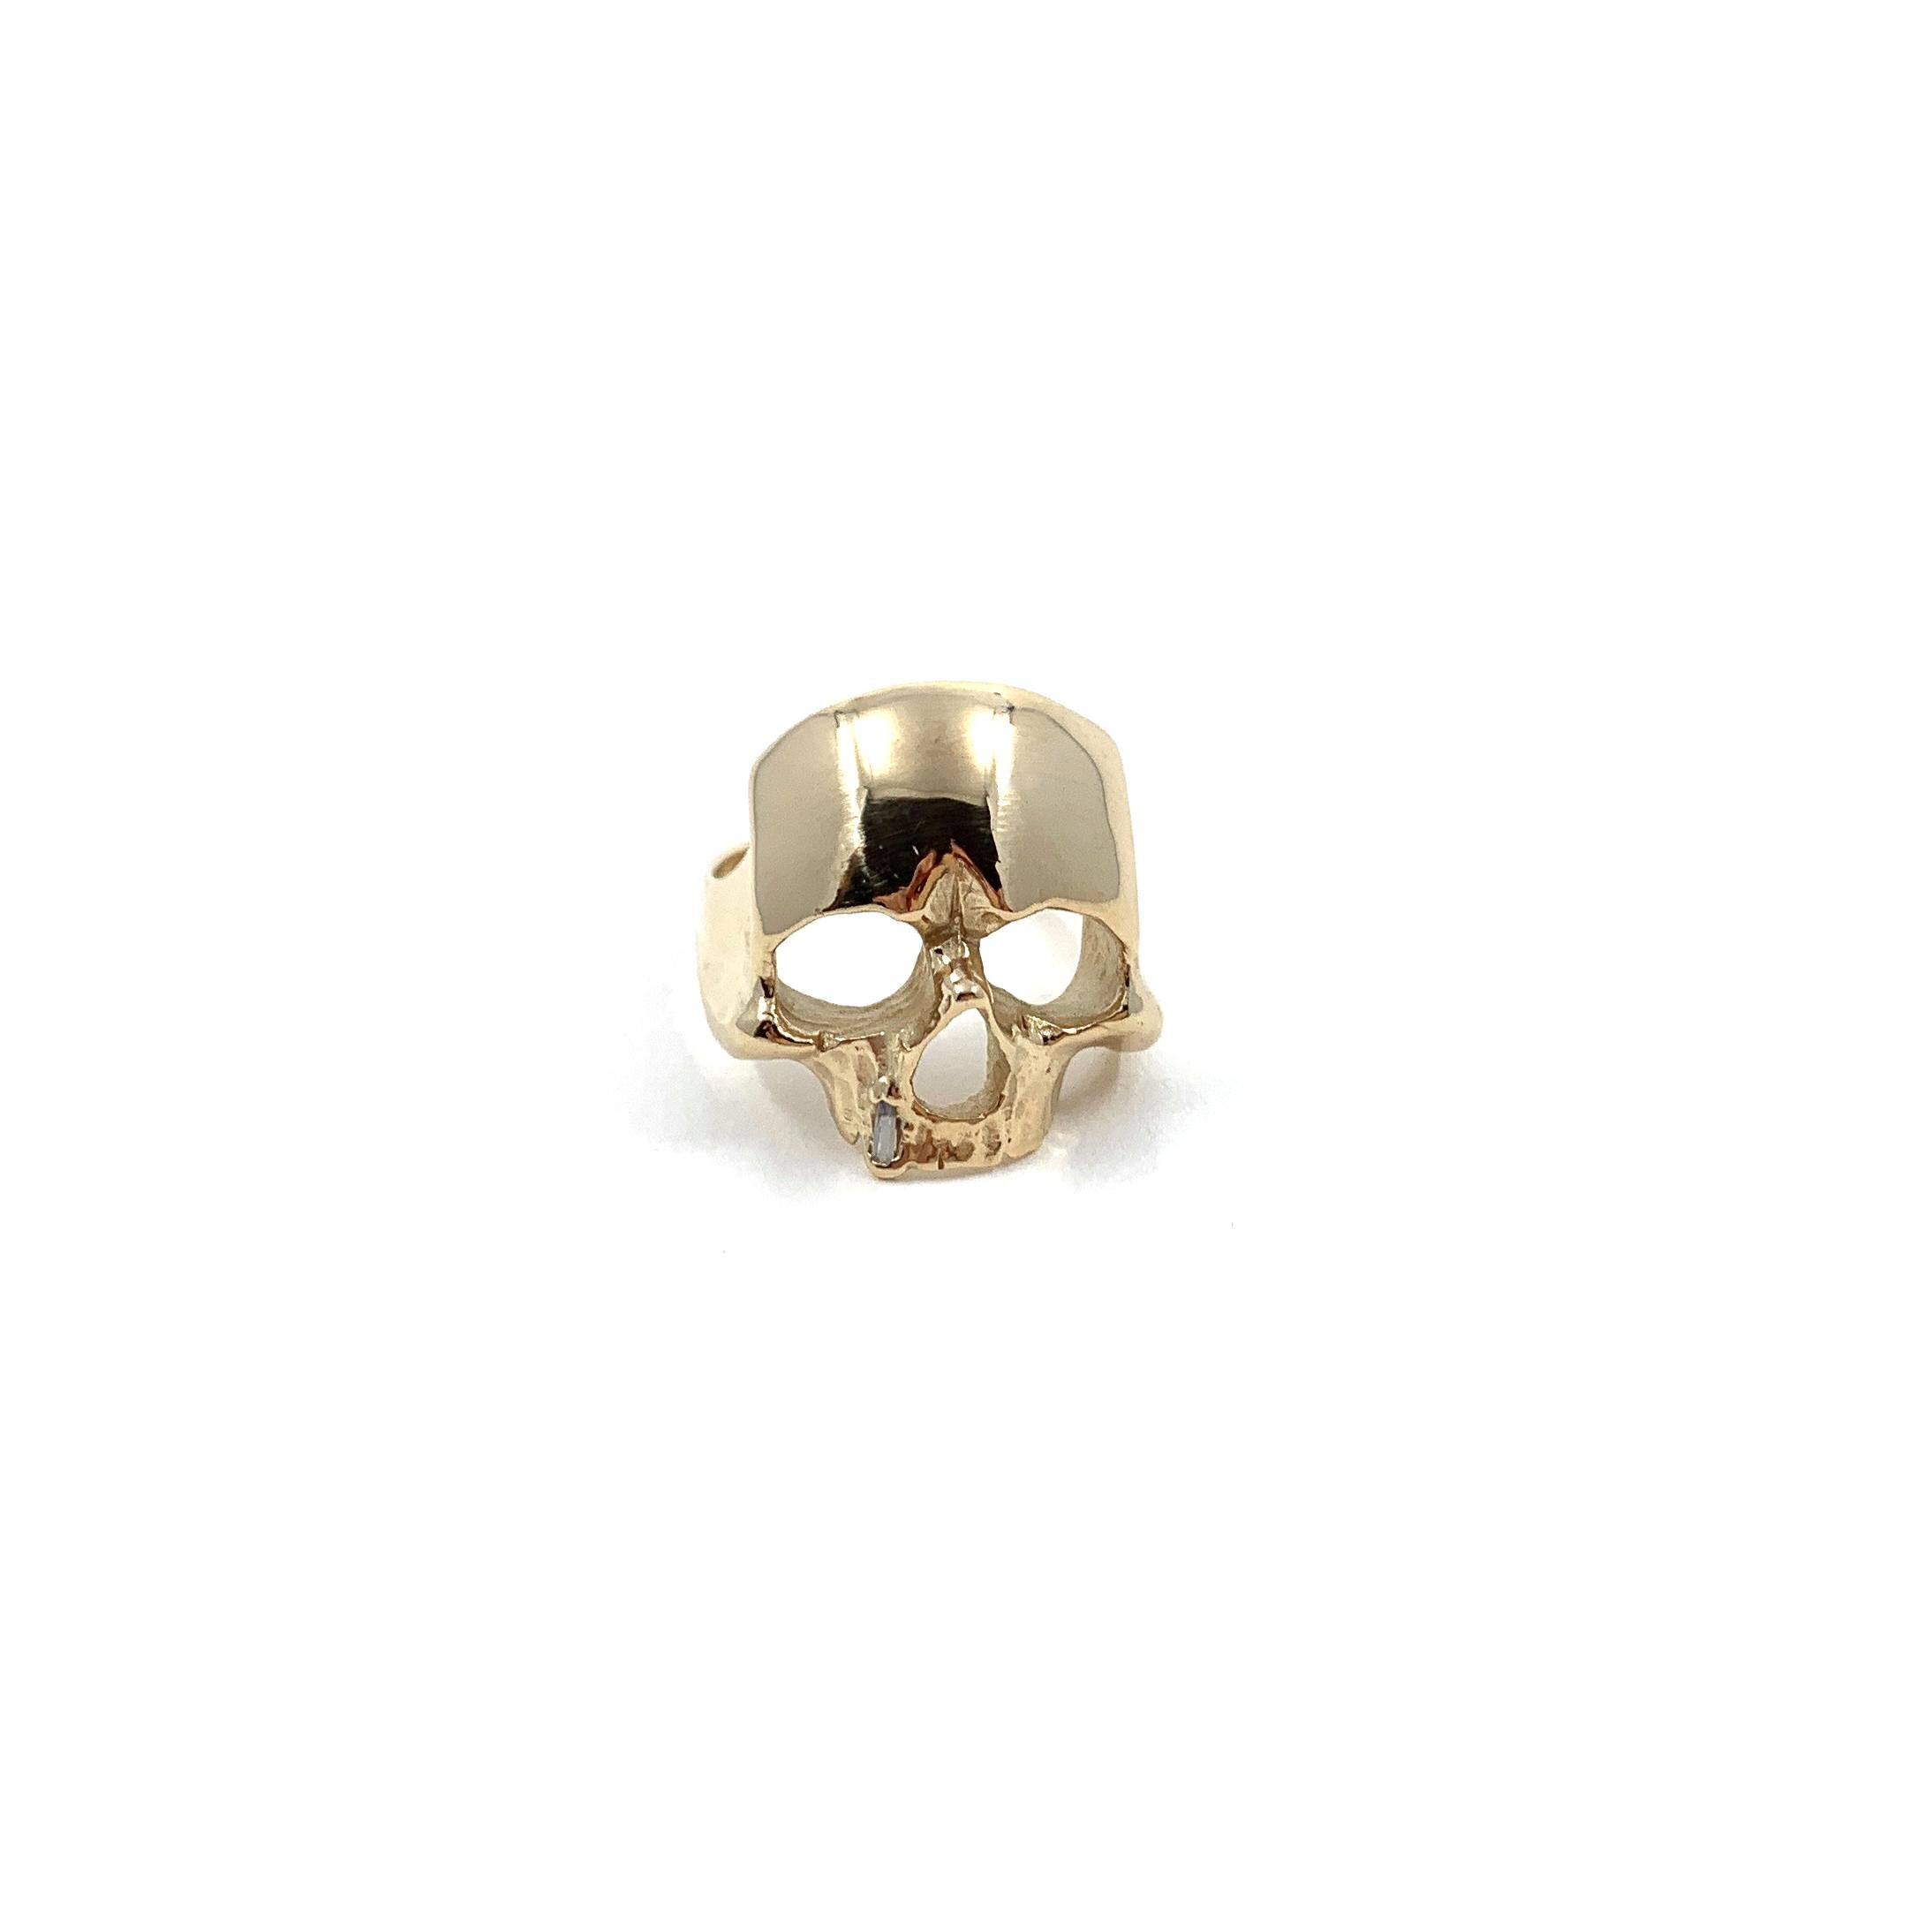 For Sale:  Memento Mori Skull Ring in 14k Gold with Diamond Tooth by Alex Jacques Designs 2